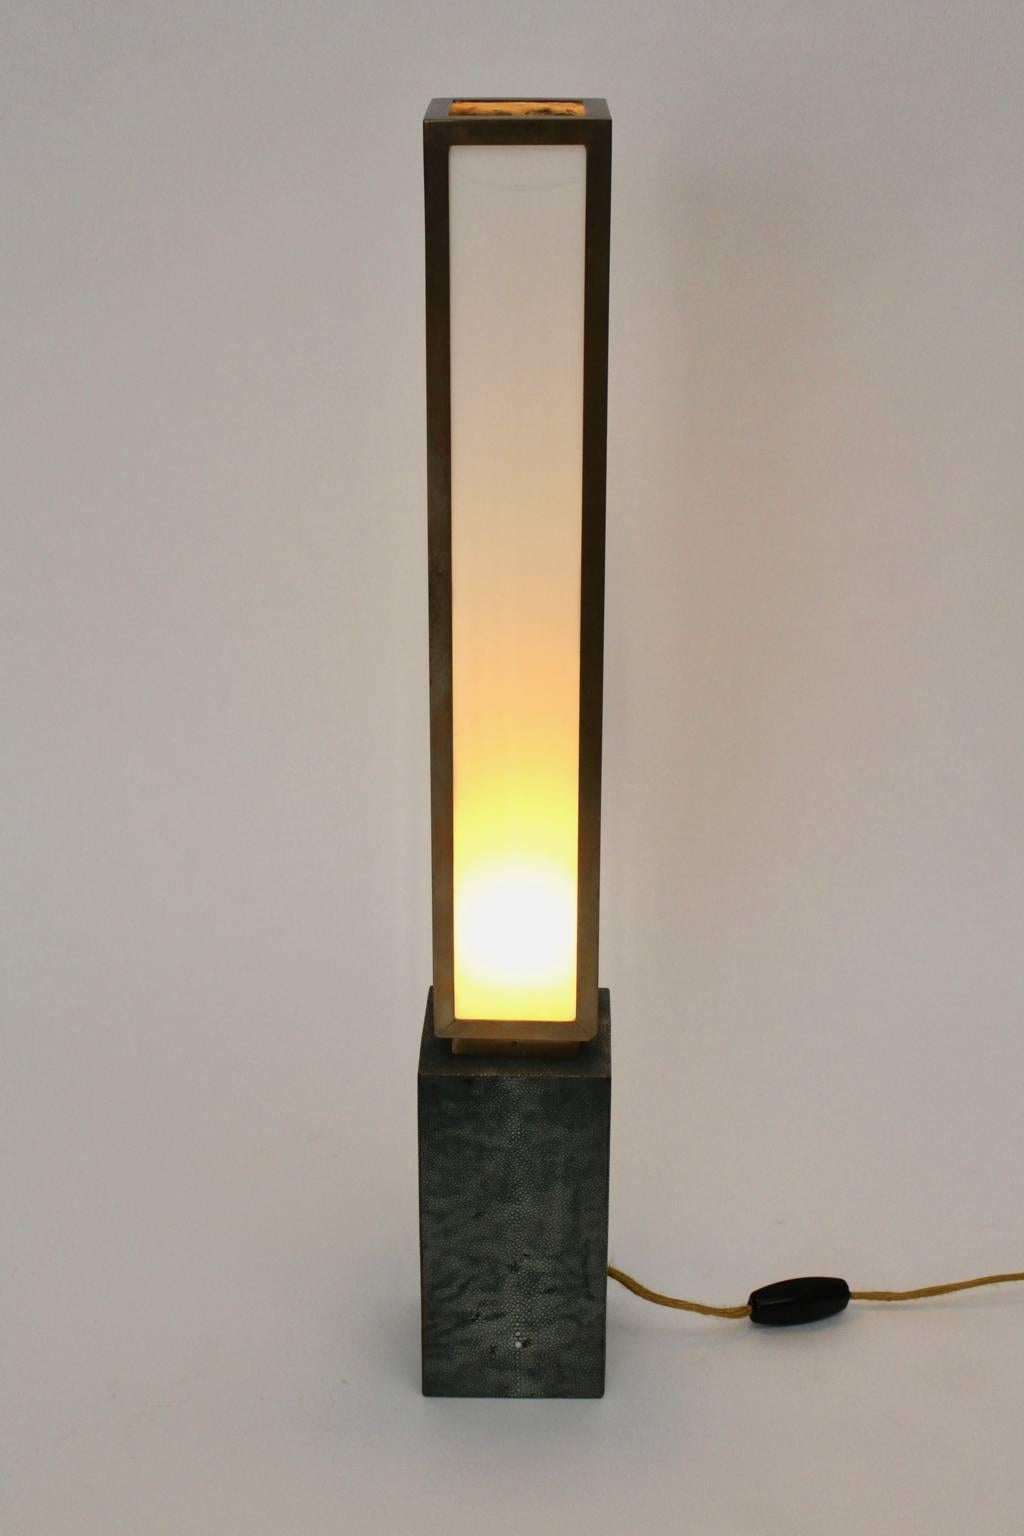 Early 20th Century Art Deco Vintage Glass Stingray Table Lamp Style Eckart Muthesius 1920s Germany For Sale